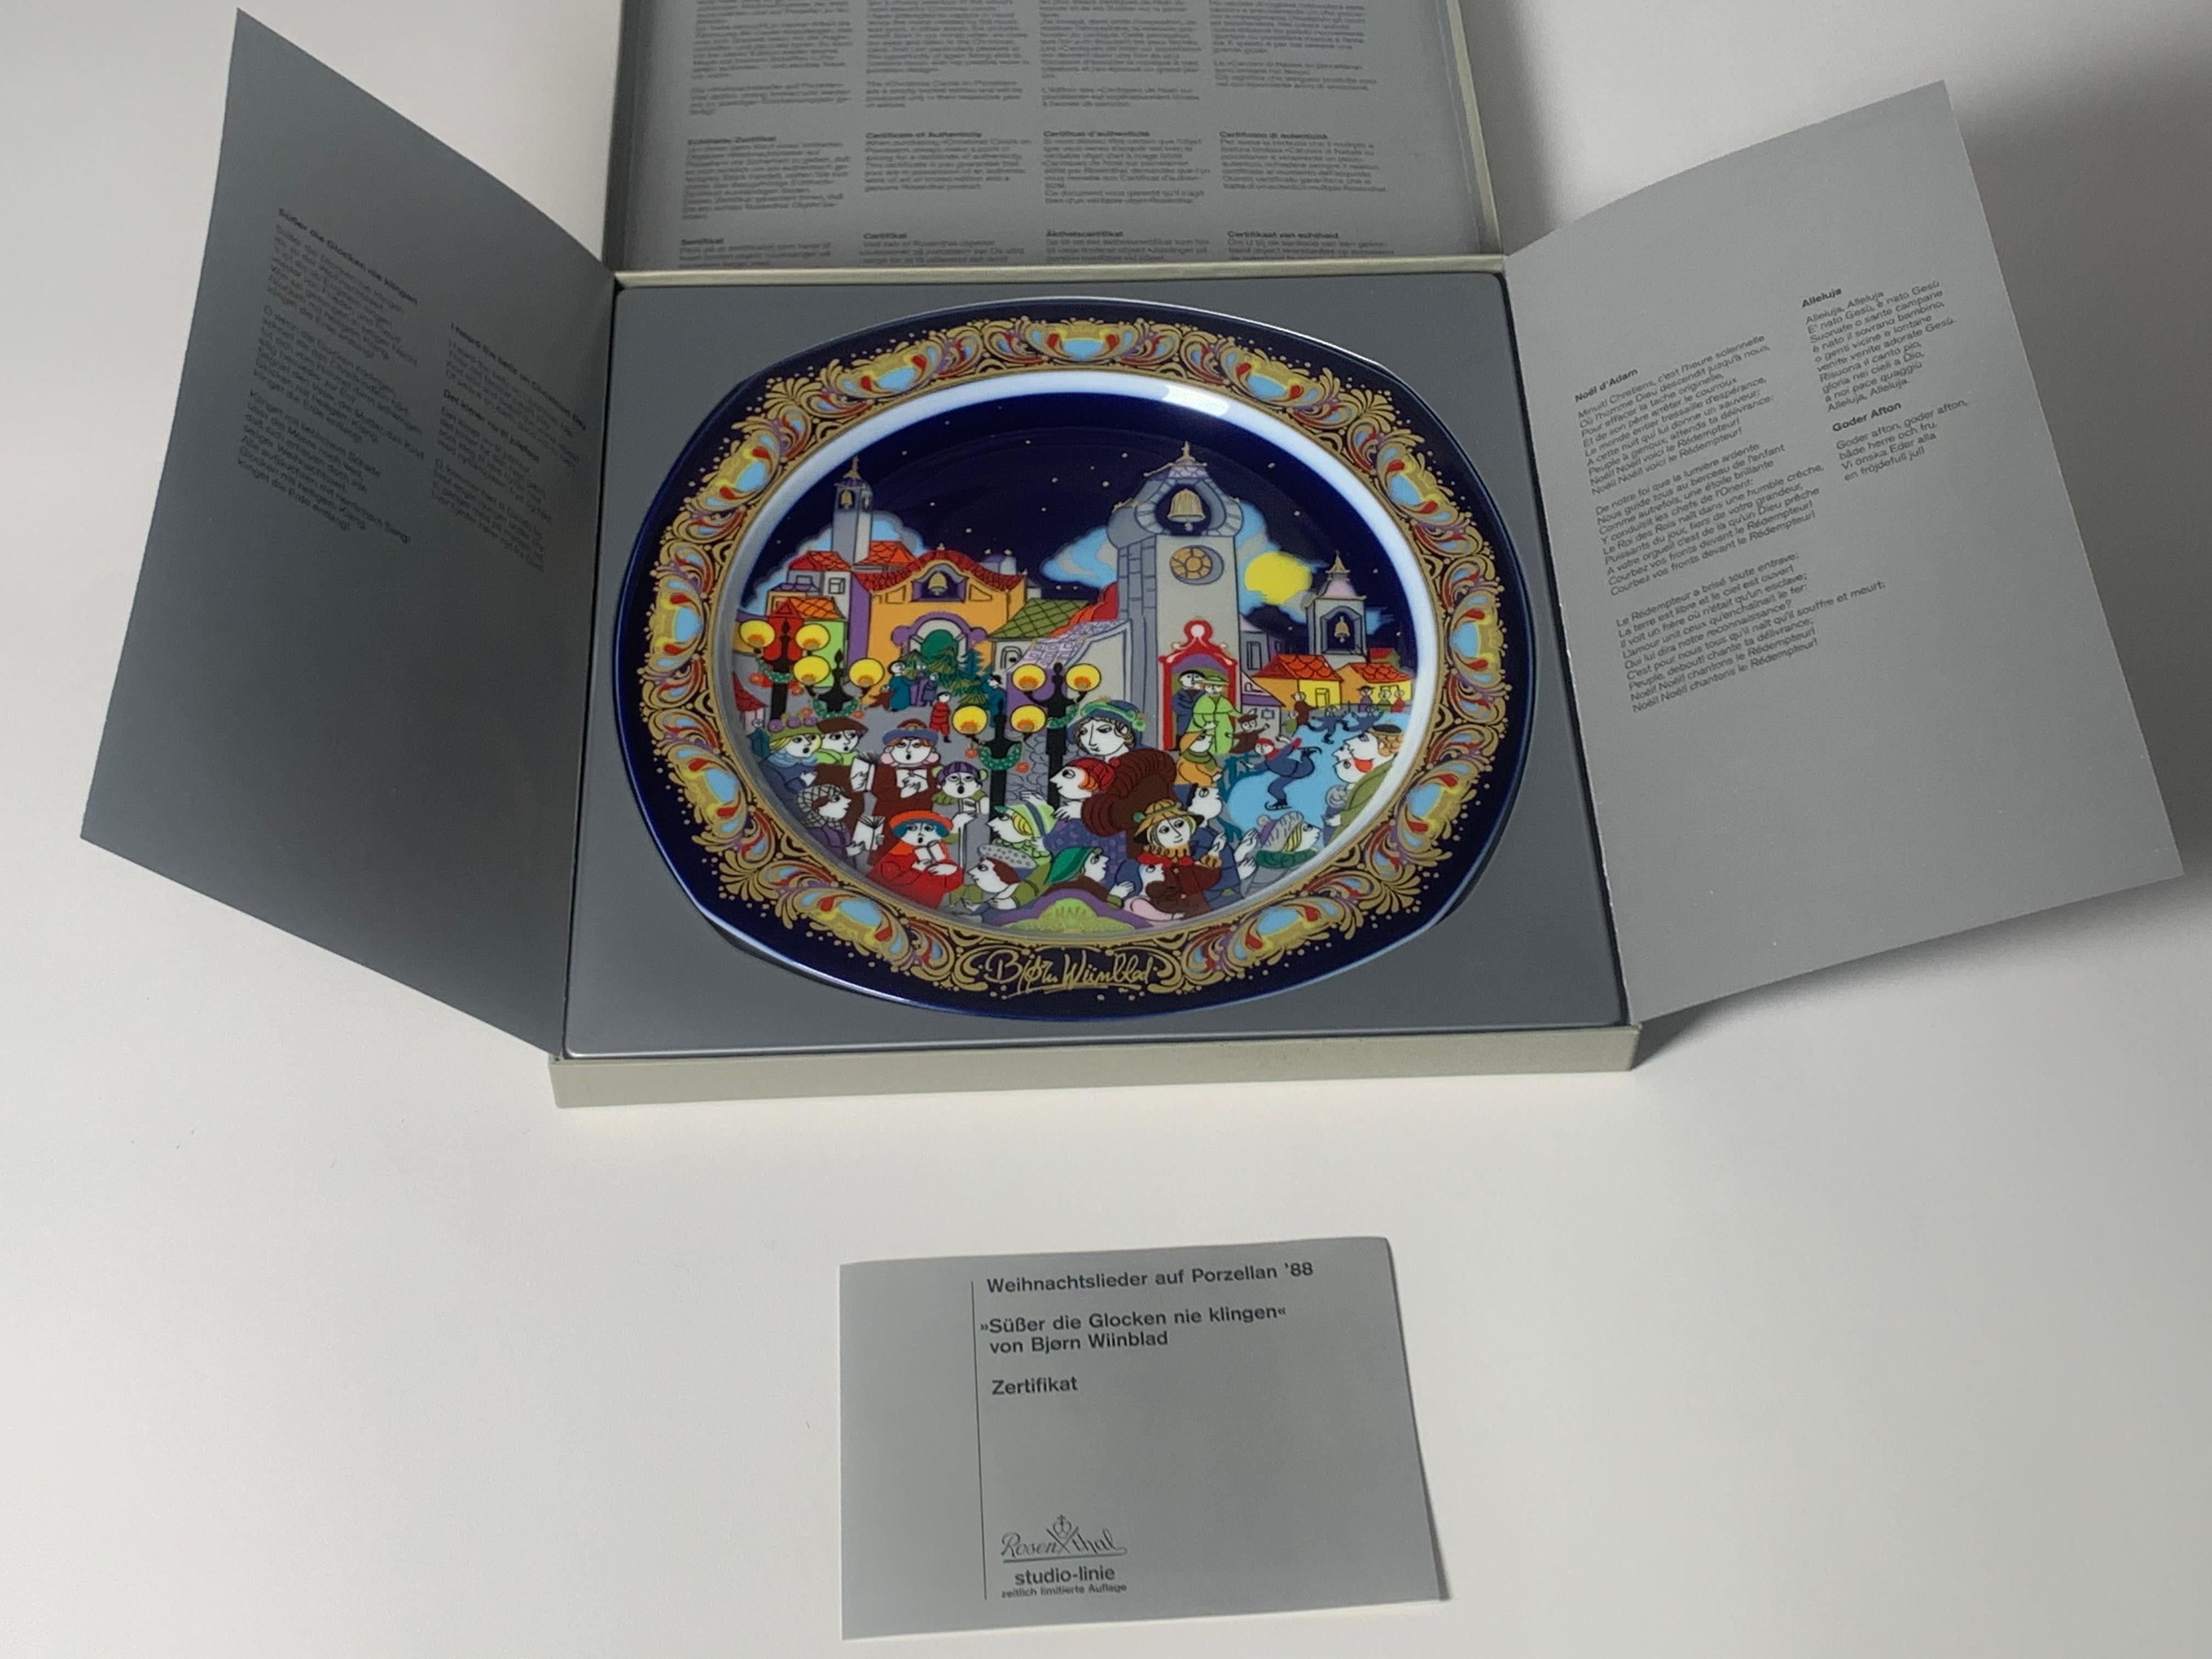 Porcelain Christmas plate from 1988 by Bjorn Wiinblad made by the German manufacturer Rosenthal. The dish is titled “I Heard the Bells on Christmas Day” and is reason no. 6 of the series. When Rosenthal asked the Danish artist to illustrate a new